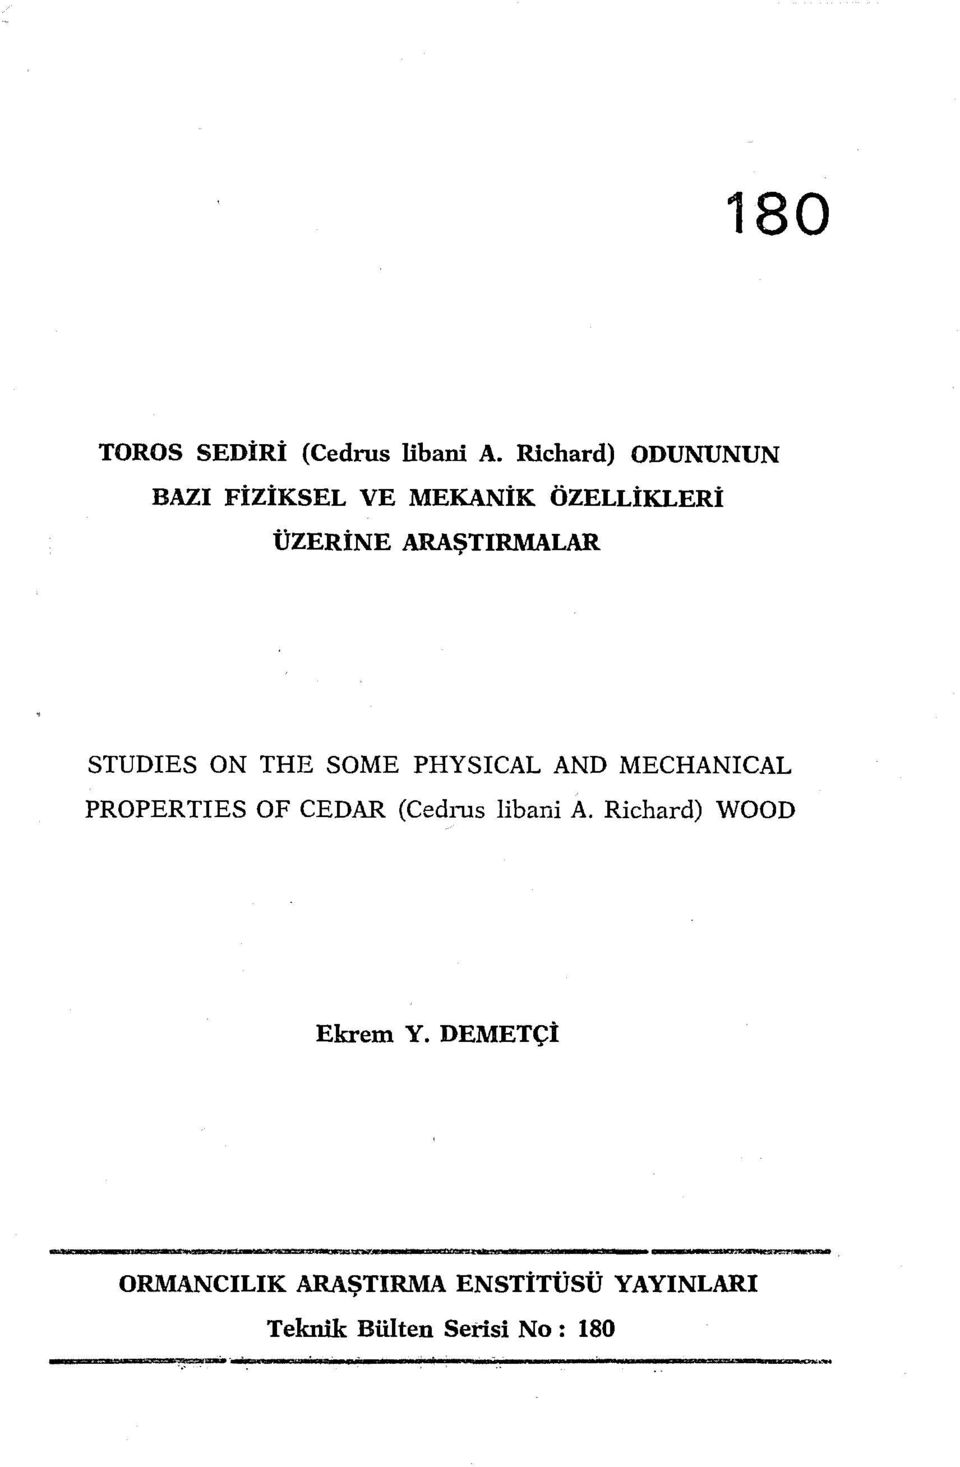 ARAŞTIRMALAR STUDIES ON THE SOME PHYSICAL AND MECHANICAL PROPERTIES OF